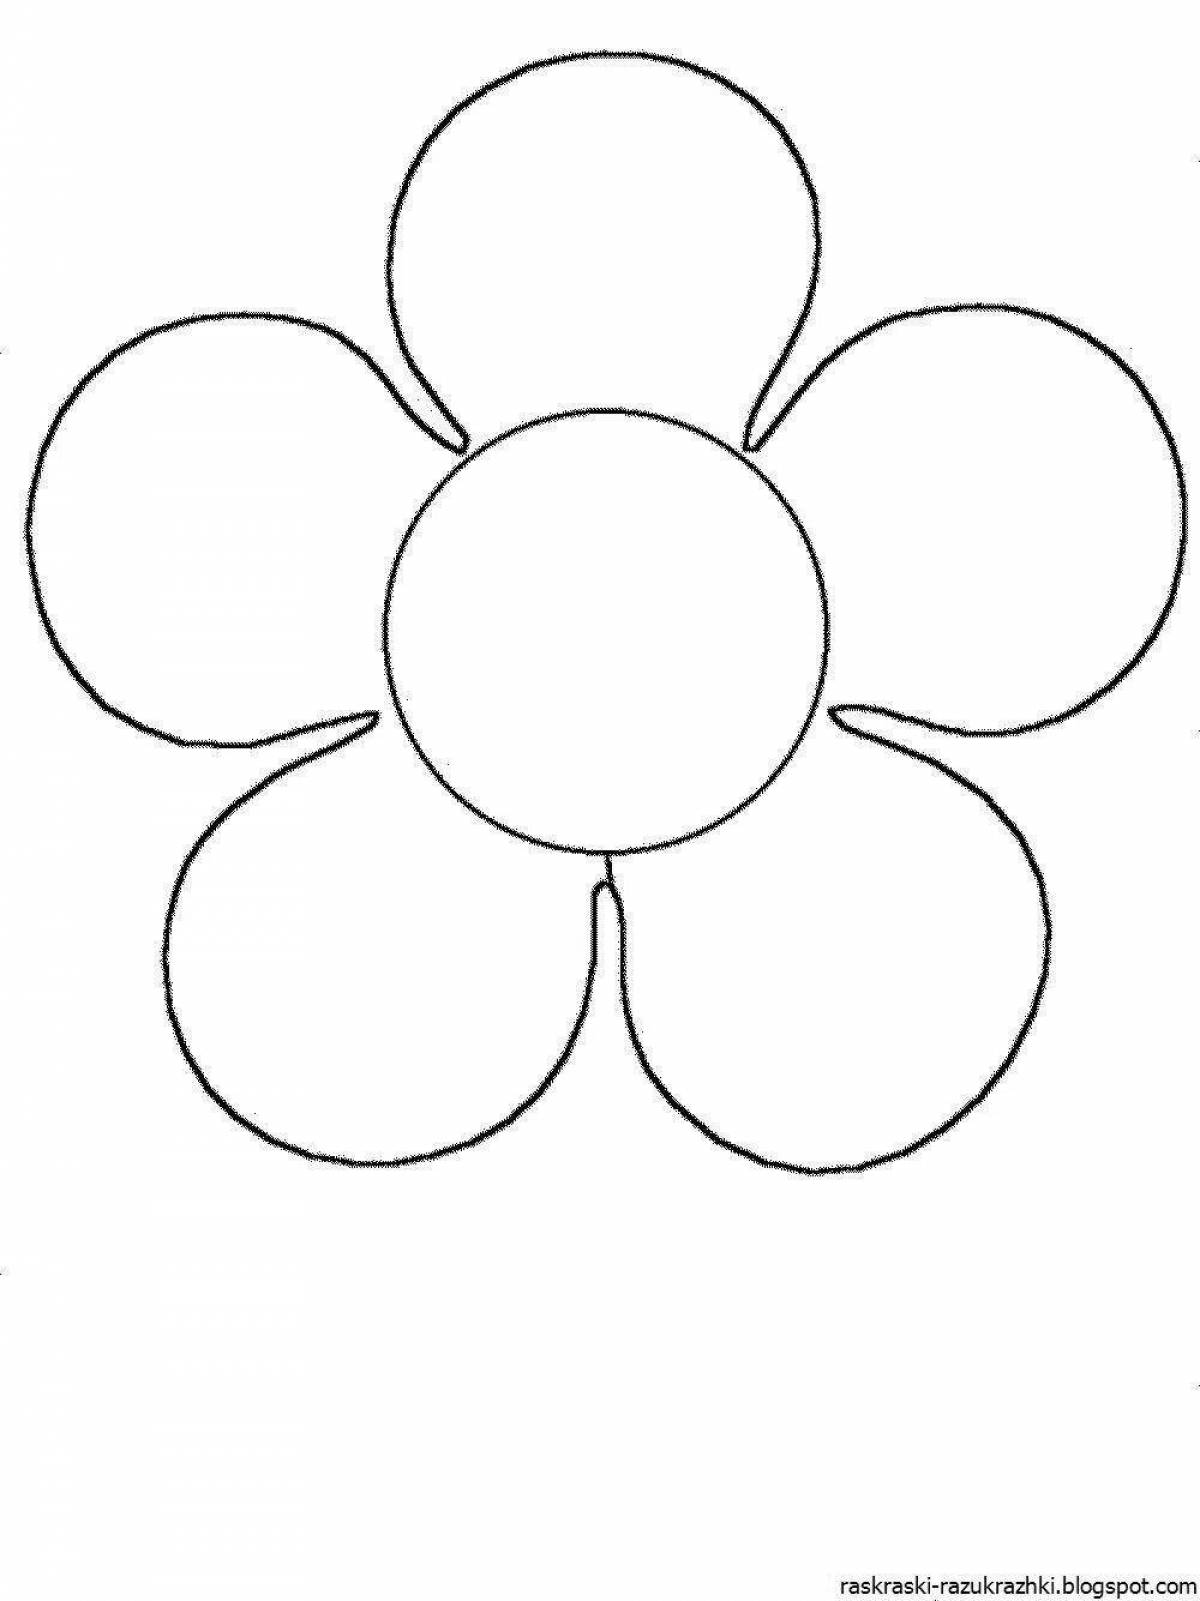 Elegant flower coloring book for children 2-3 years old